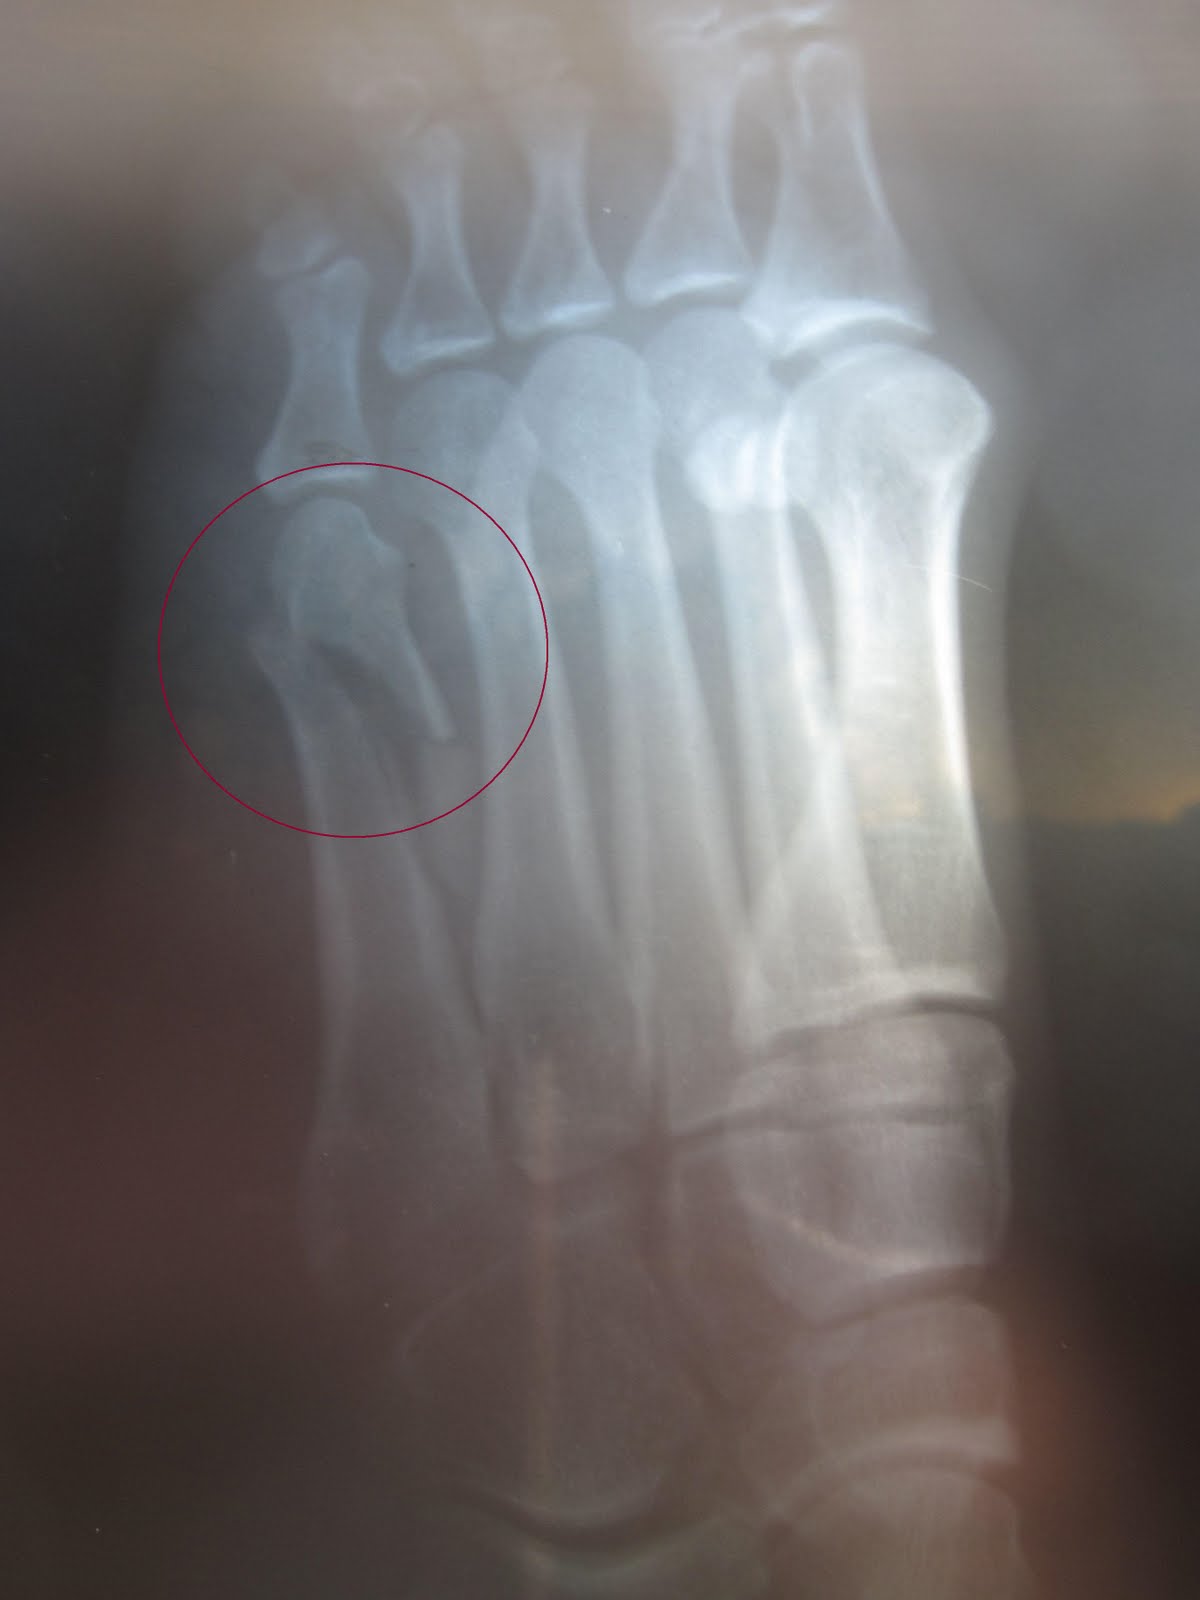 Fifth Metatarsal Fracture Fracture Treatment